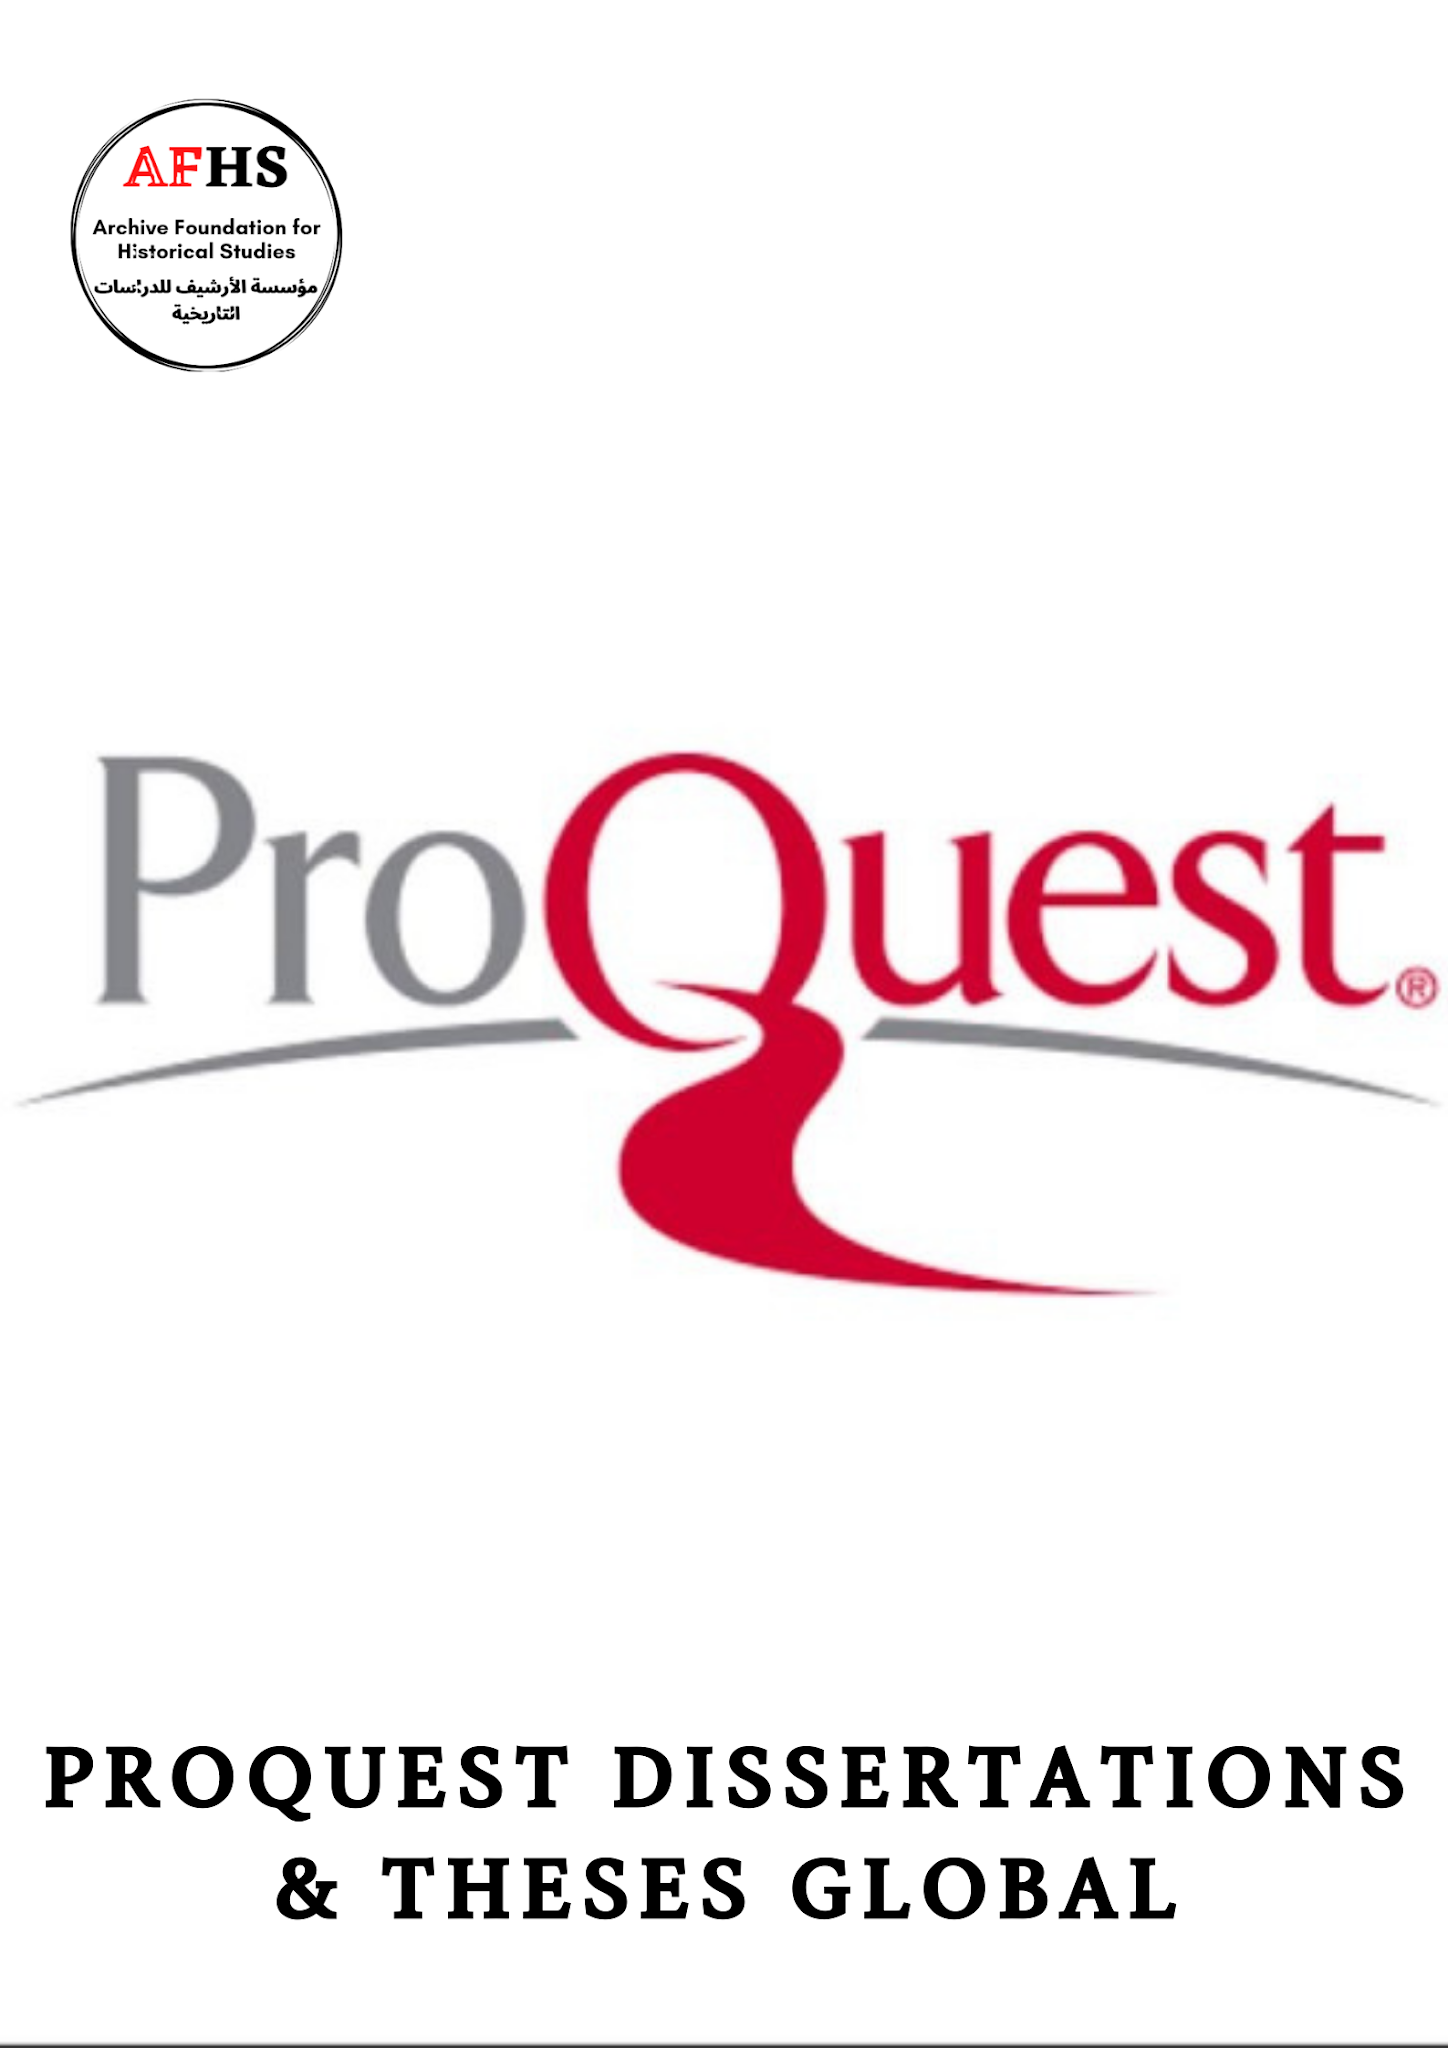 proquest dissertations & theses global the humanities and social sciences collection